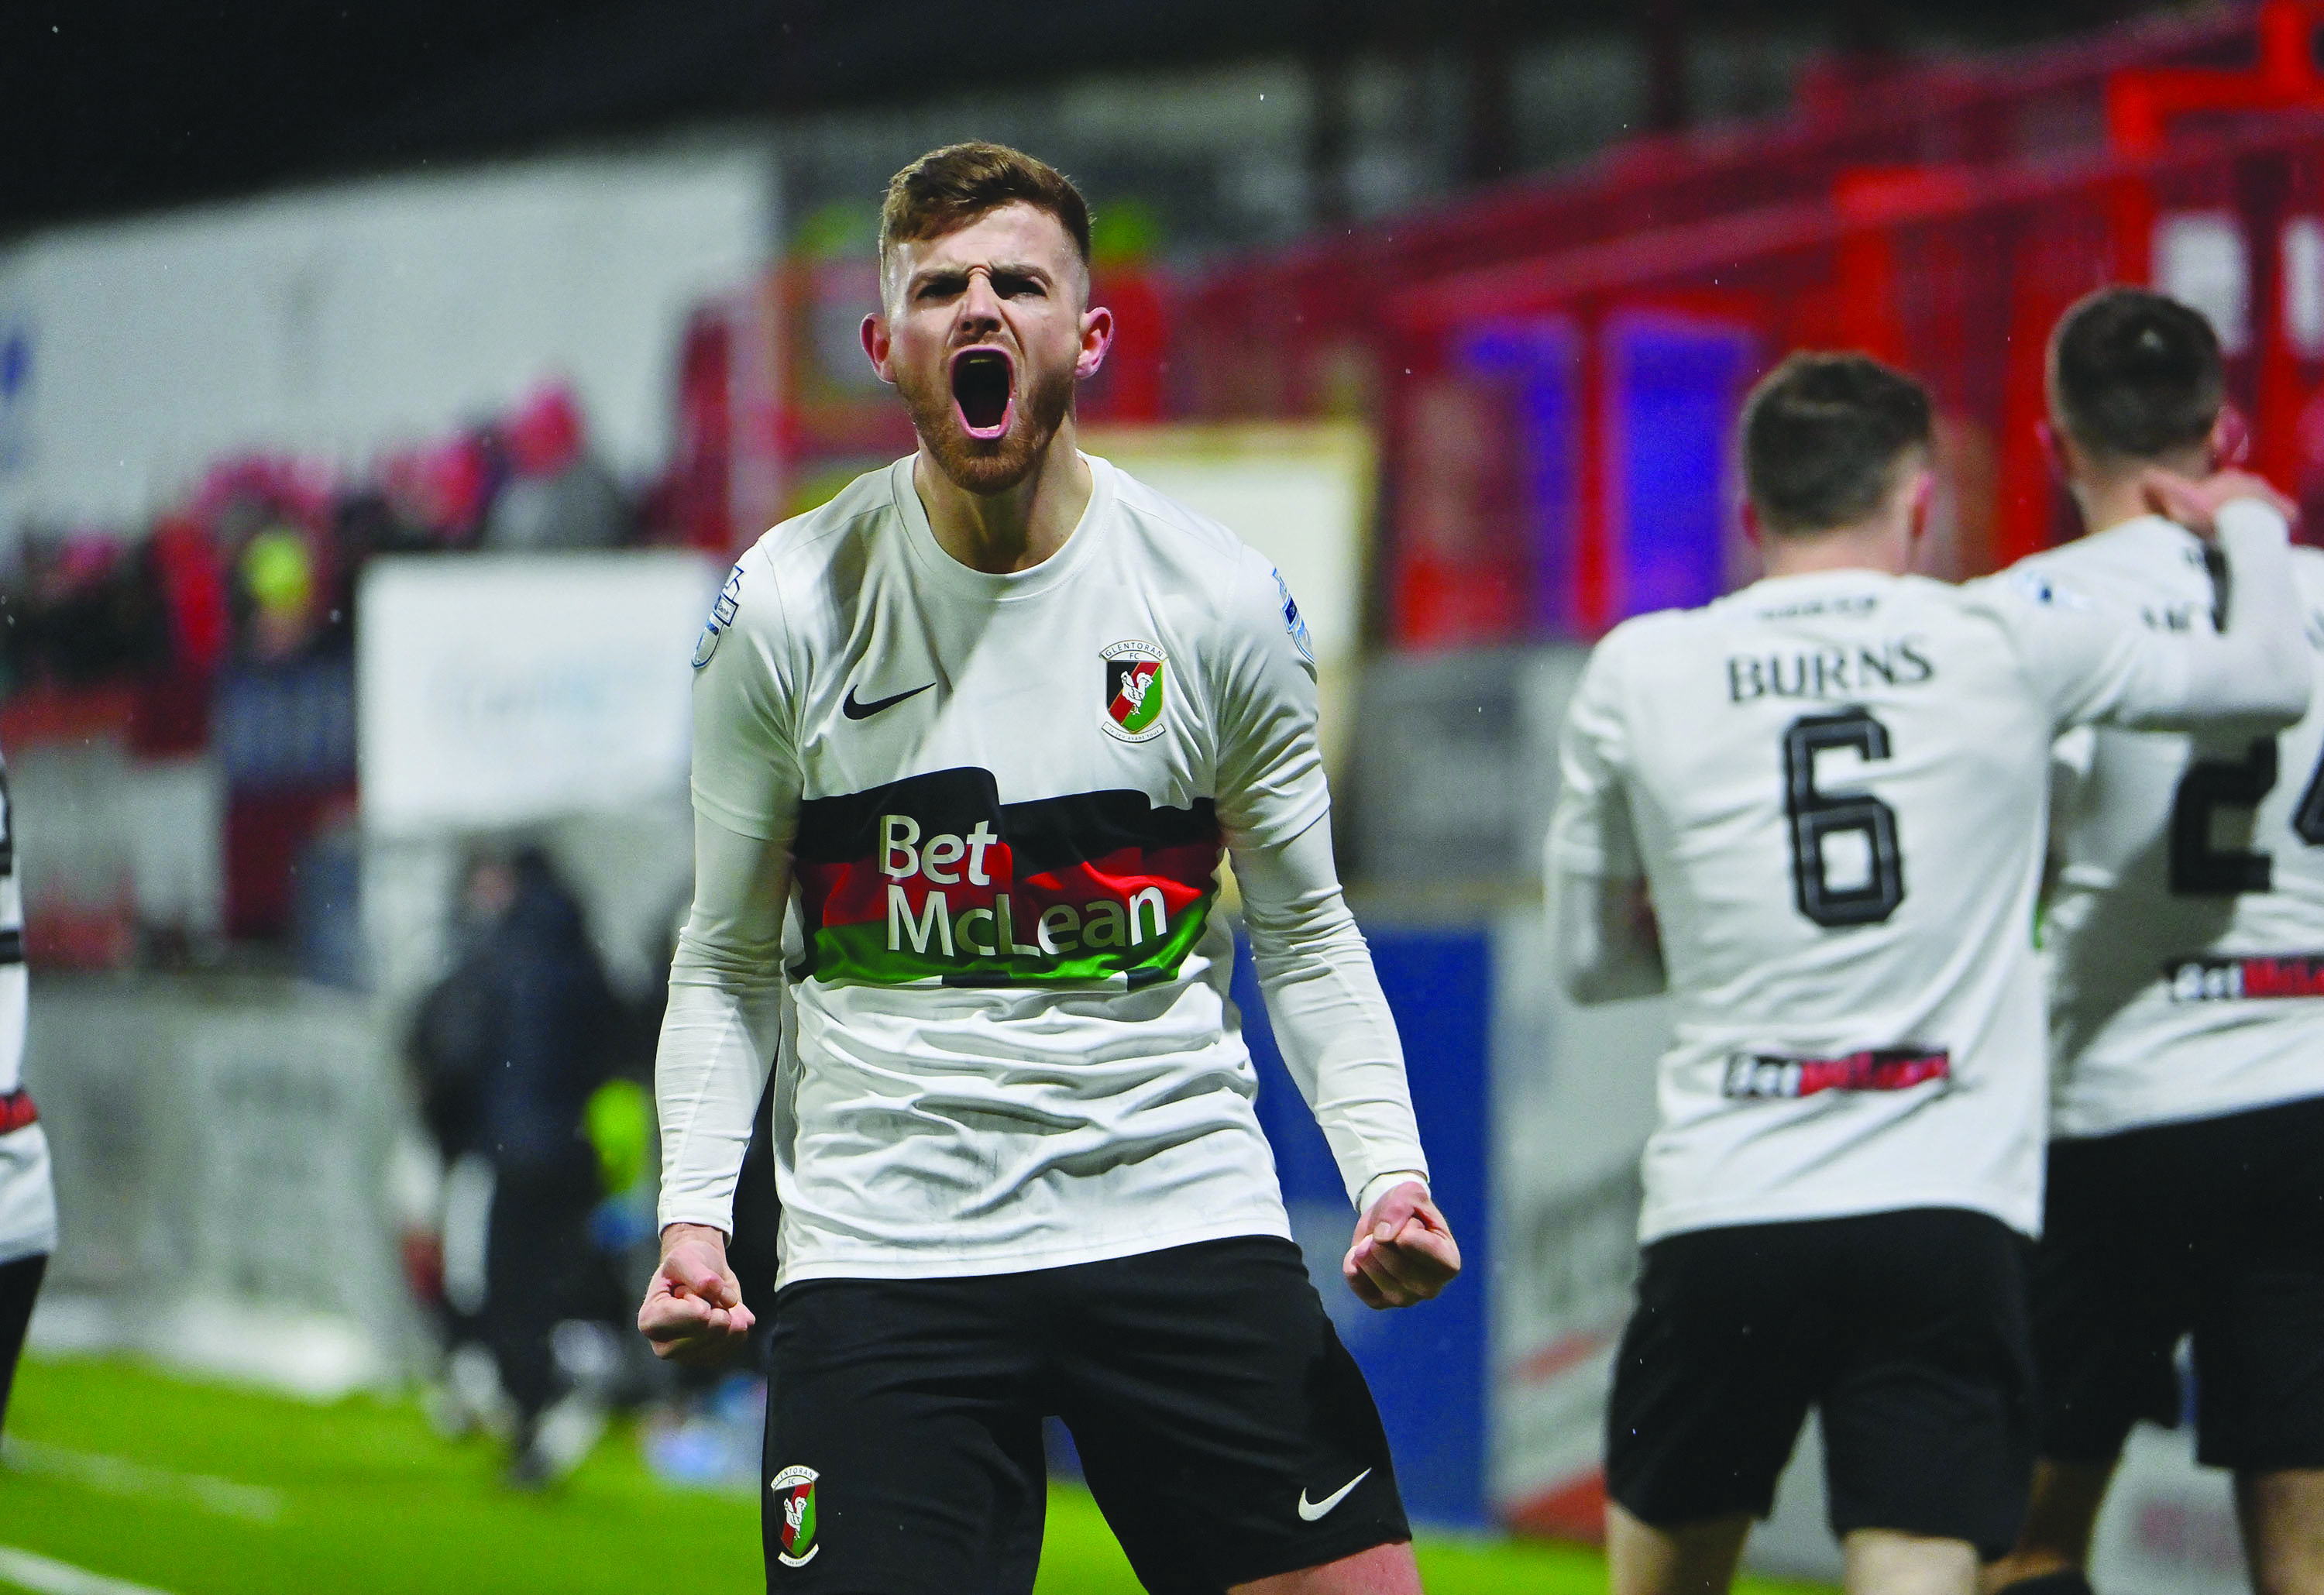 On-loan Glentoran striker Ruaidhrí Donnelly netted twice in Newington’s 2-1 win over Newry City in Round Six